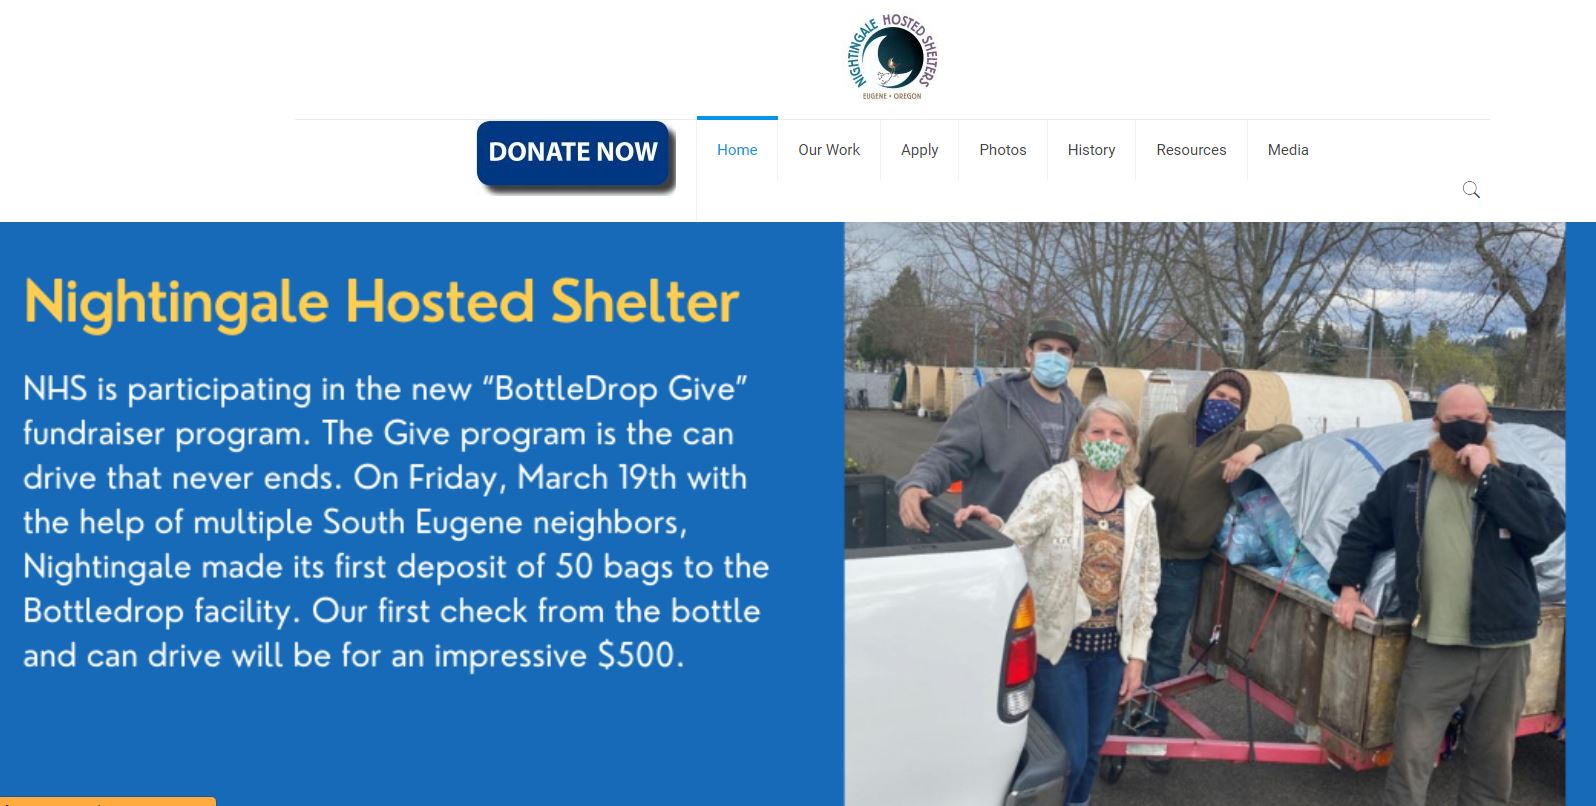 Nightingale Hosted Shelter website project